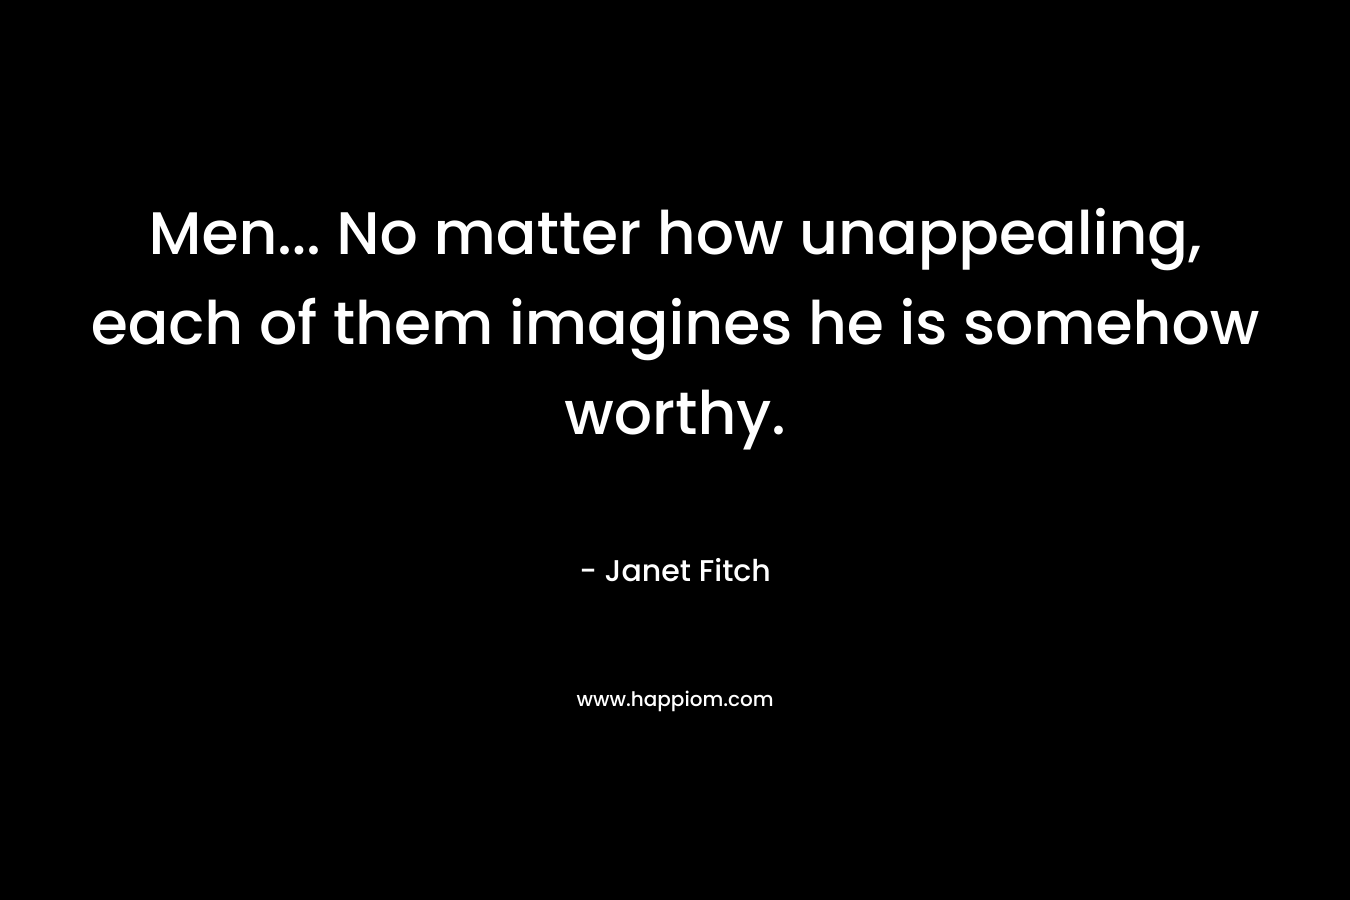 Men... No matter how unappealing, each of them imagines he is somehow worthy.